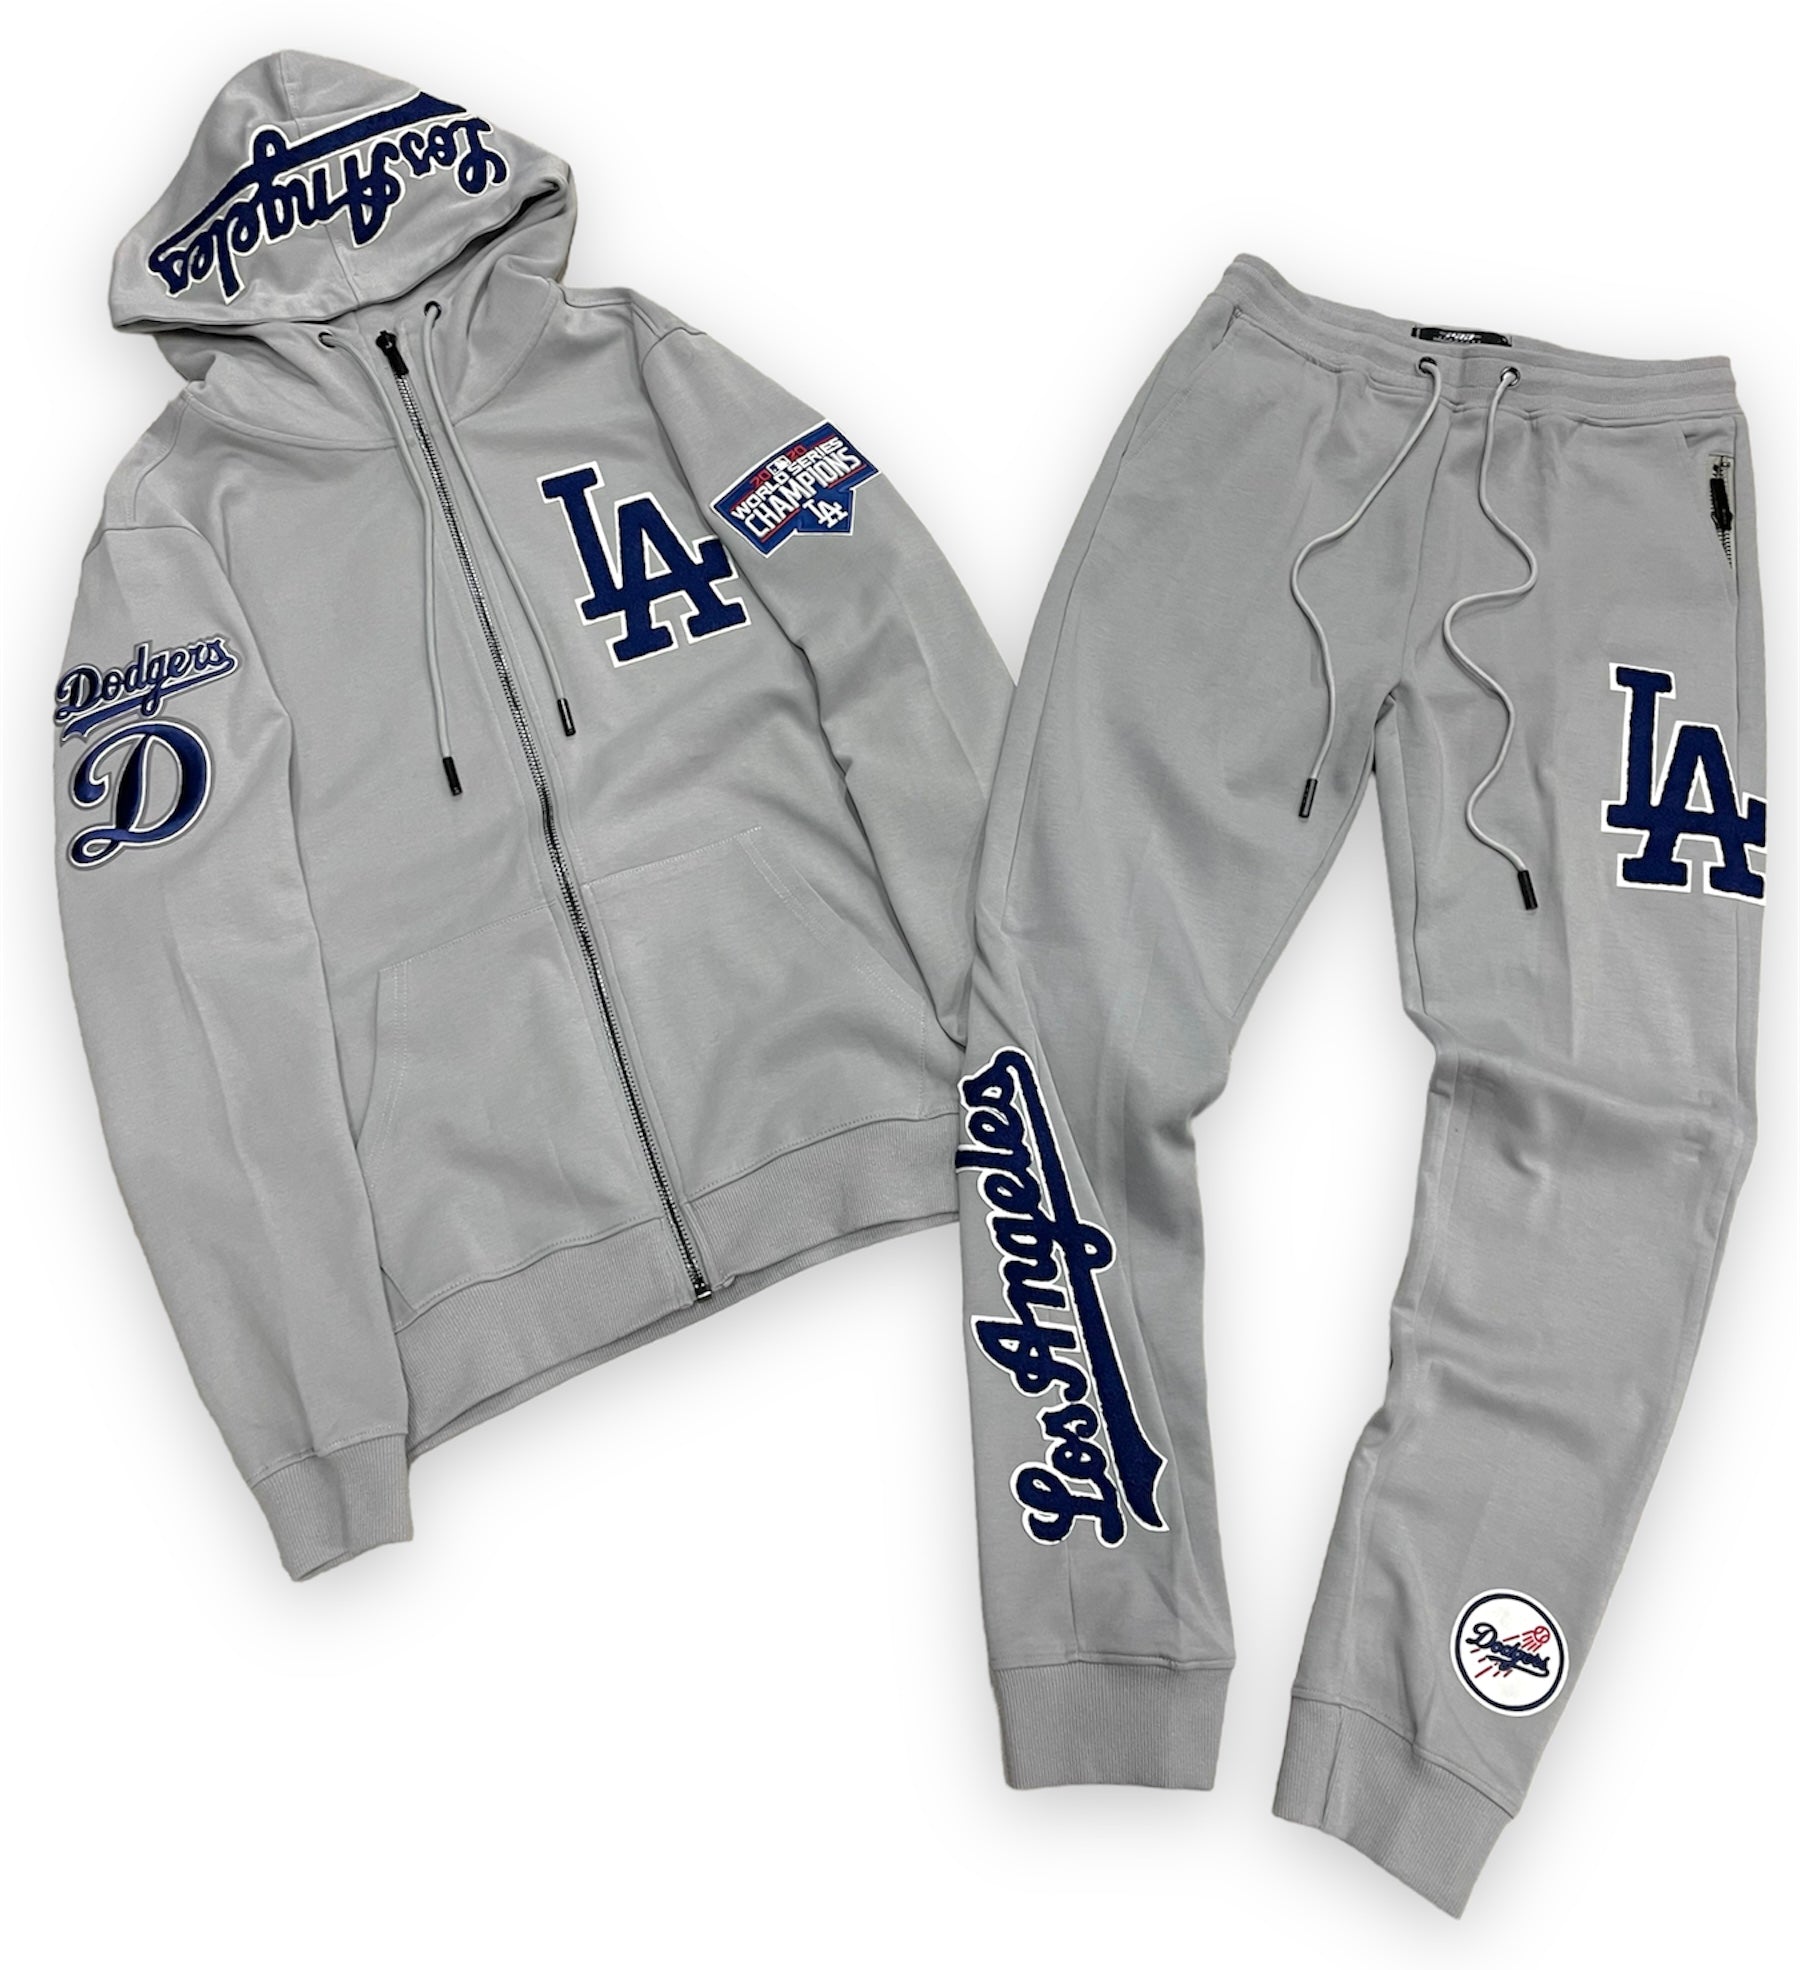 Los Angeles Dodgers Mens Pro Standard Outfit